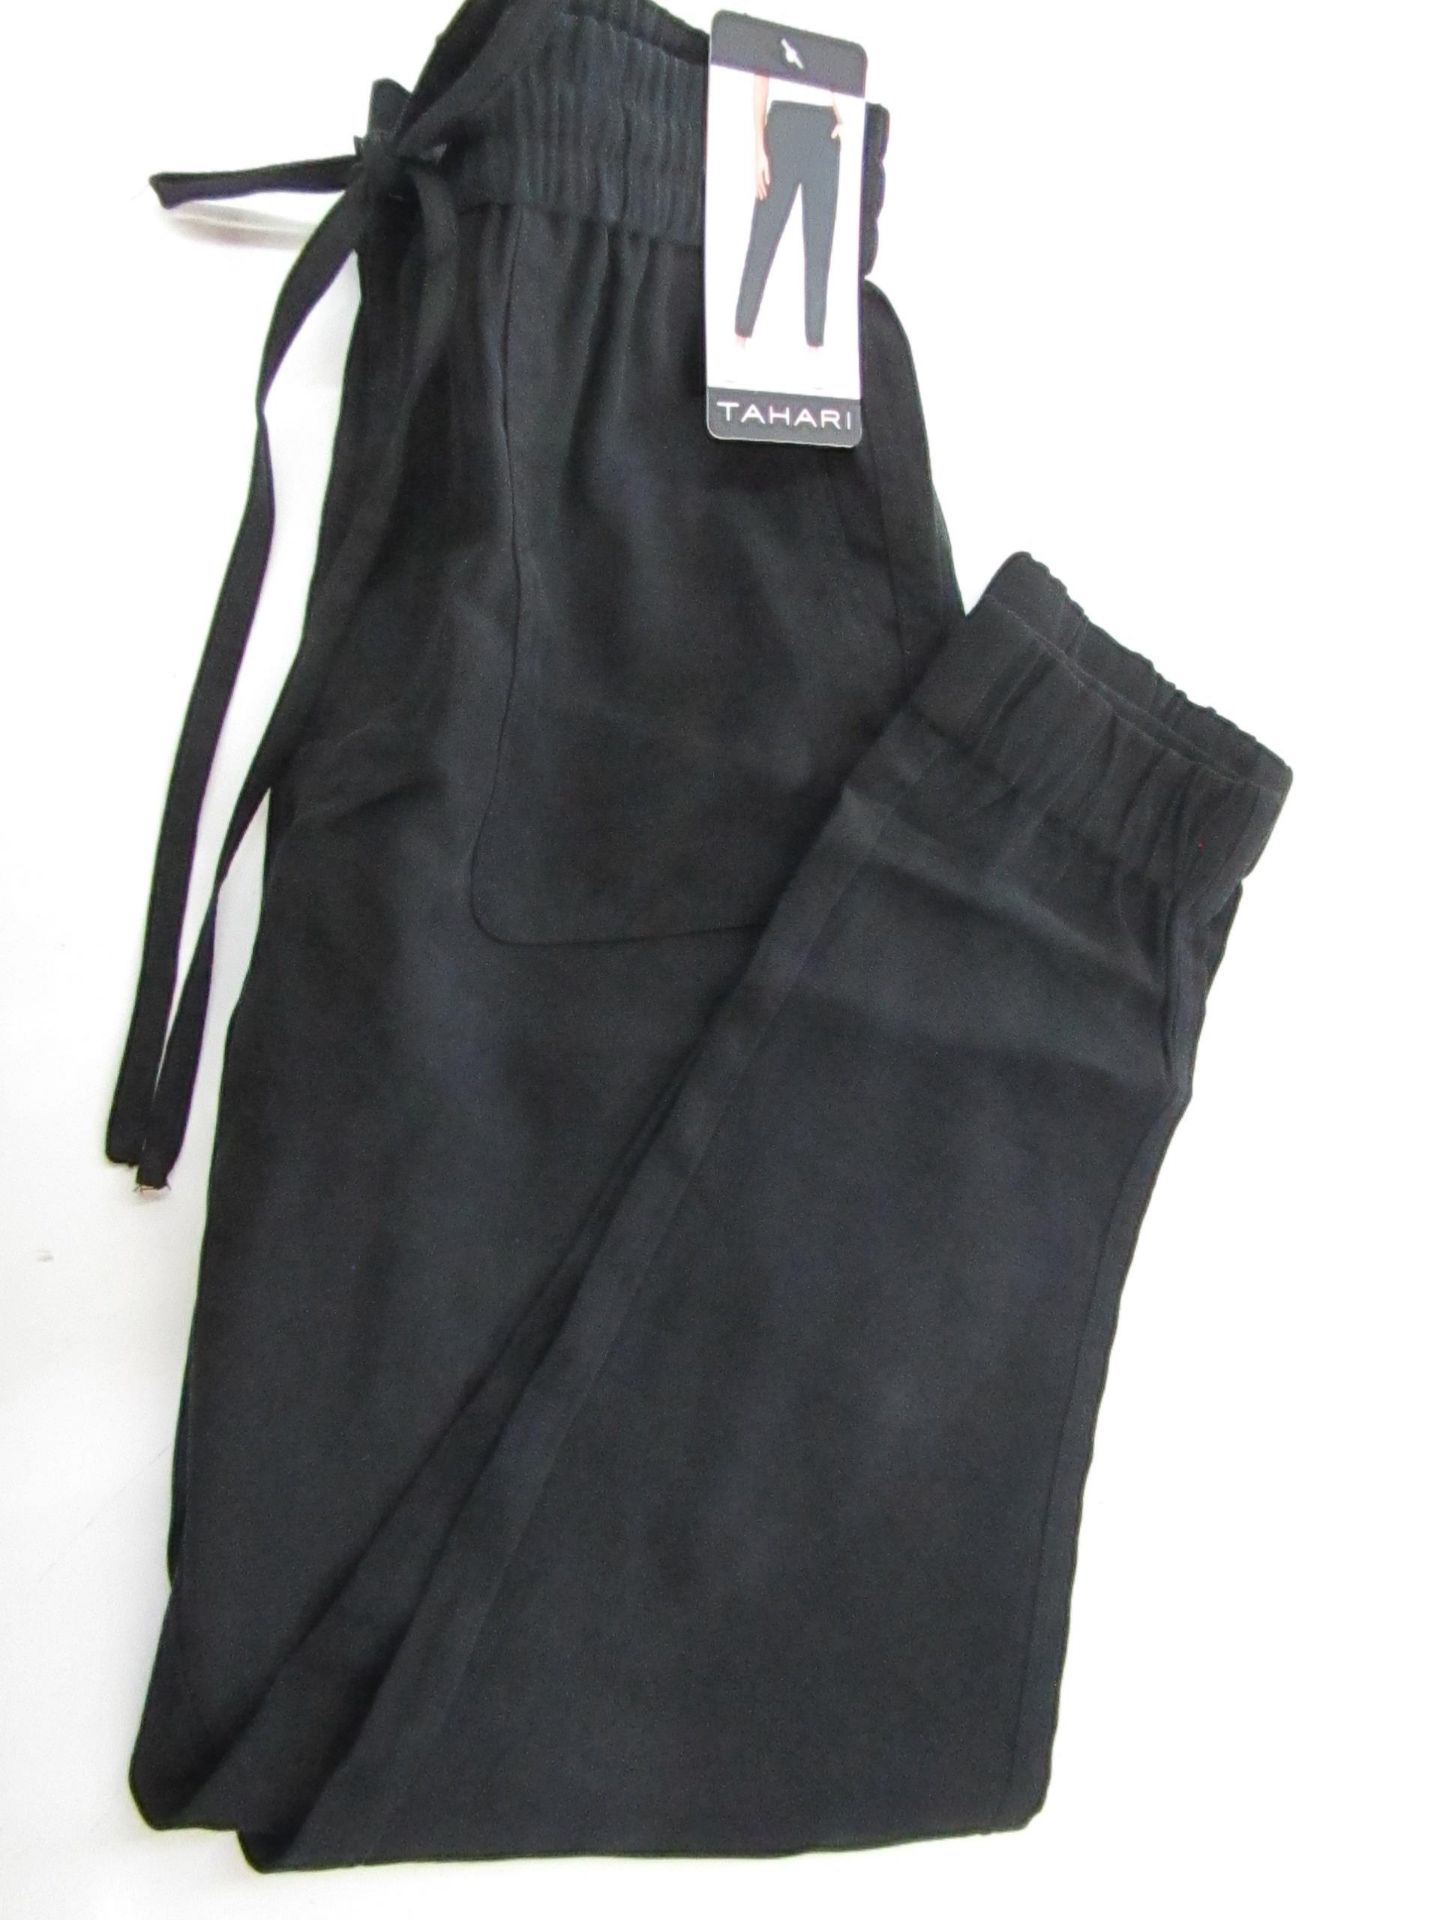 1 X Pair of Tahari Summer Pants Black Size X/S New With Tags